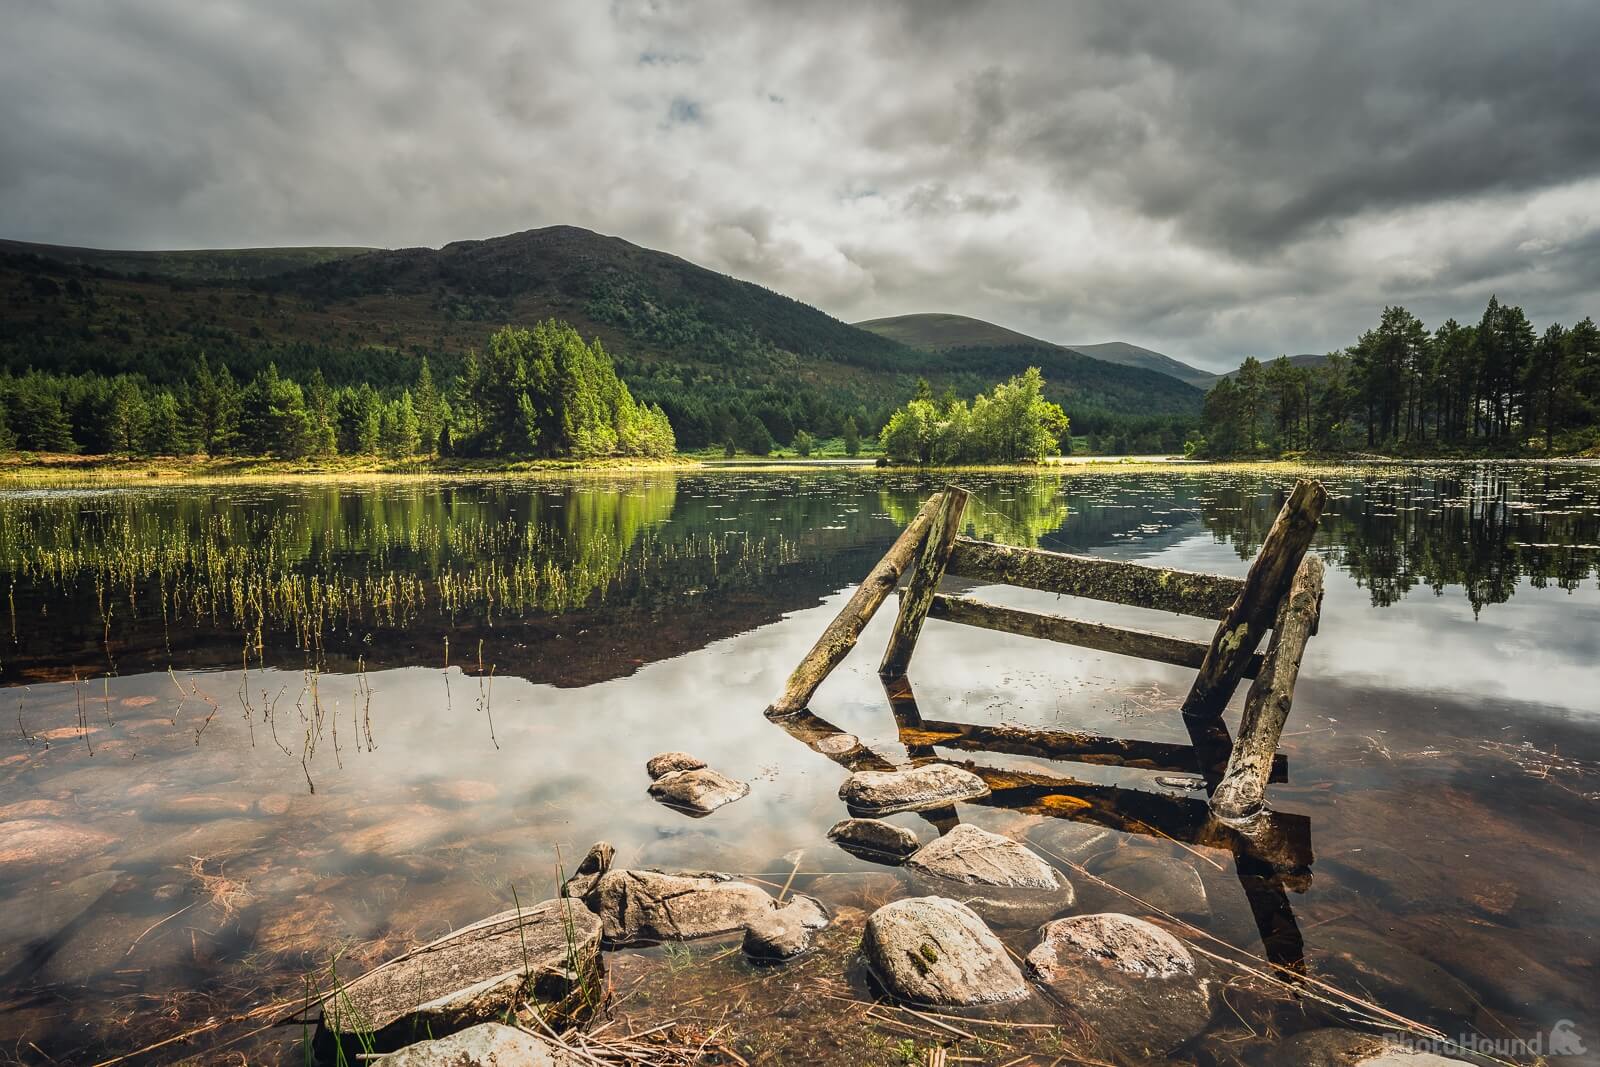 Image of Loch an Eilein by James Billings.